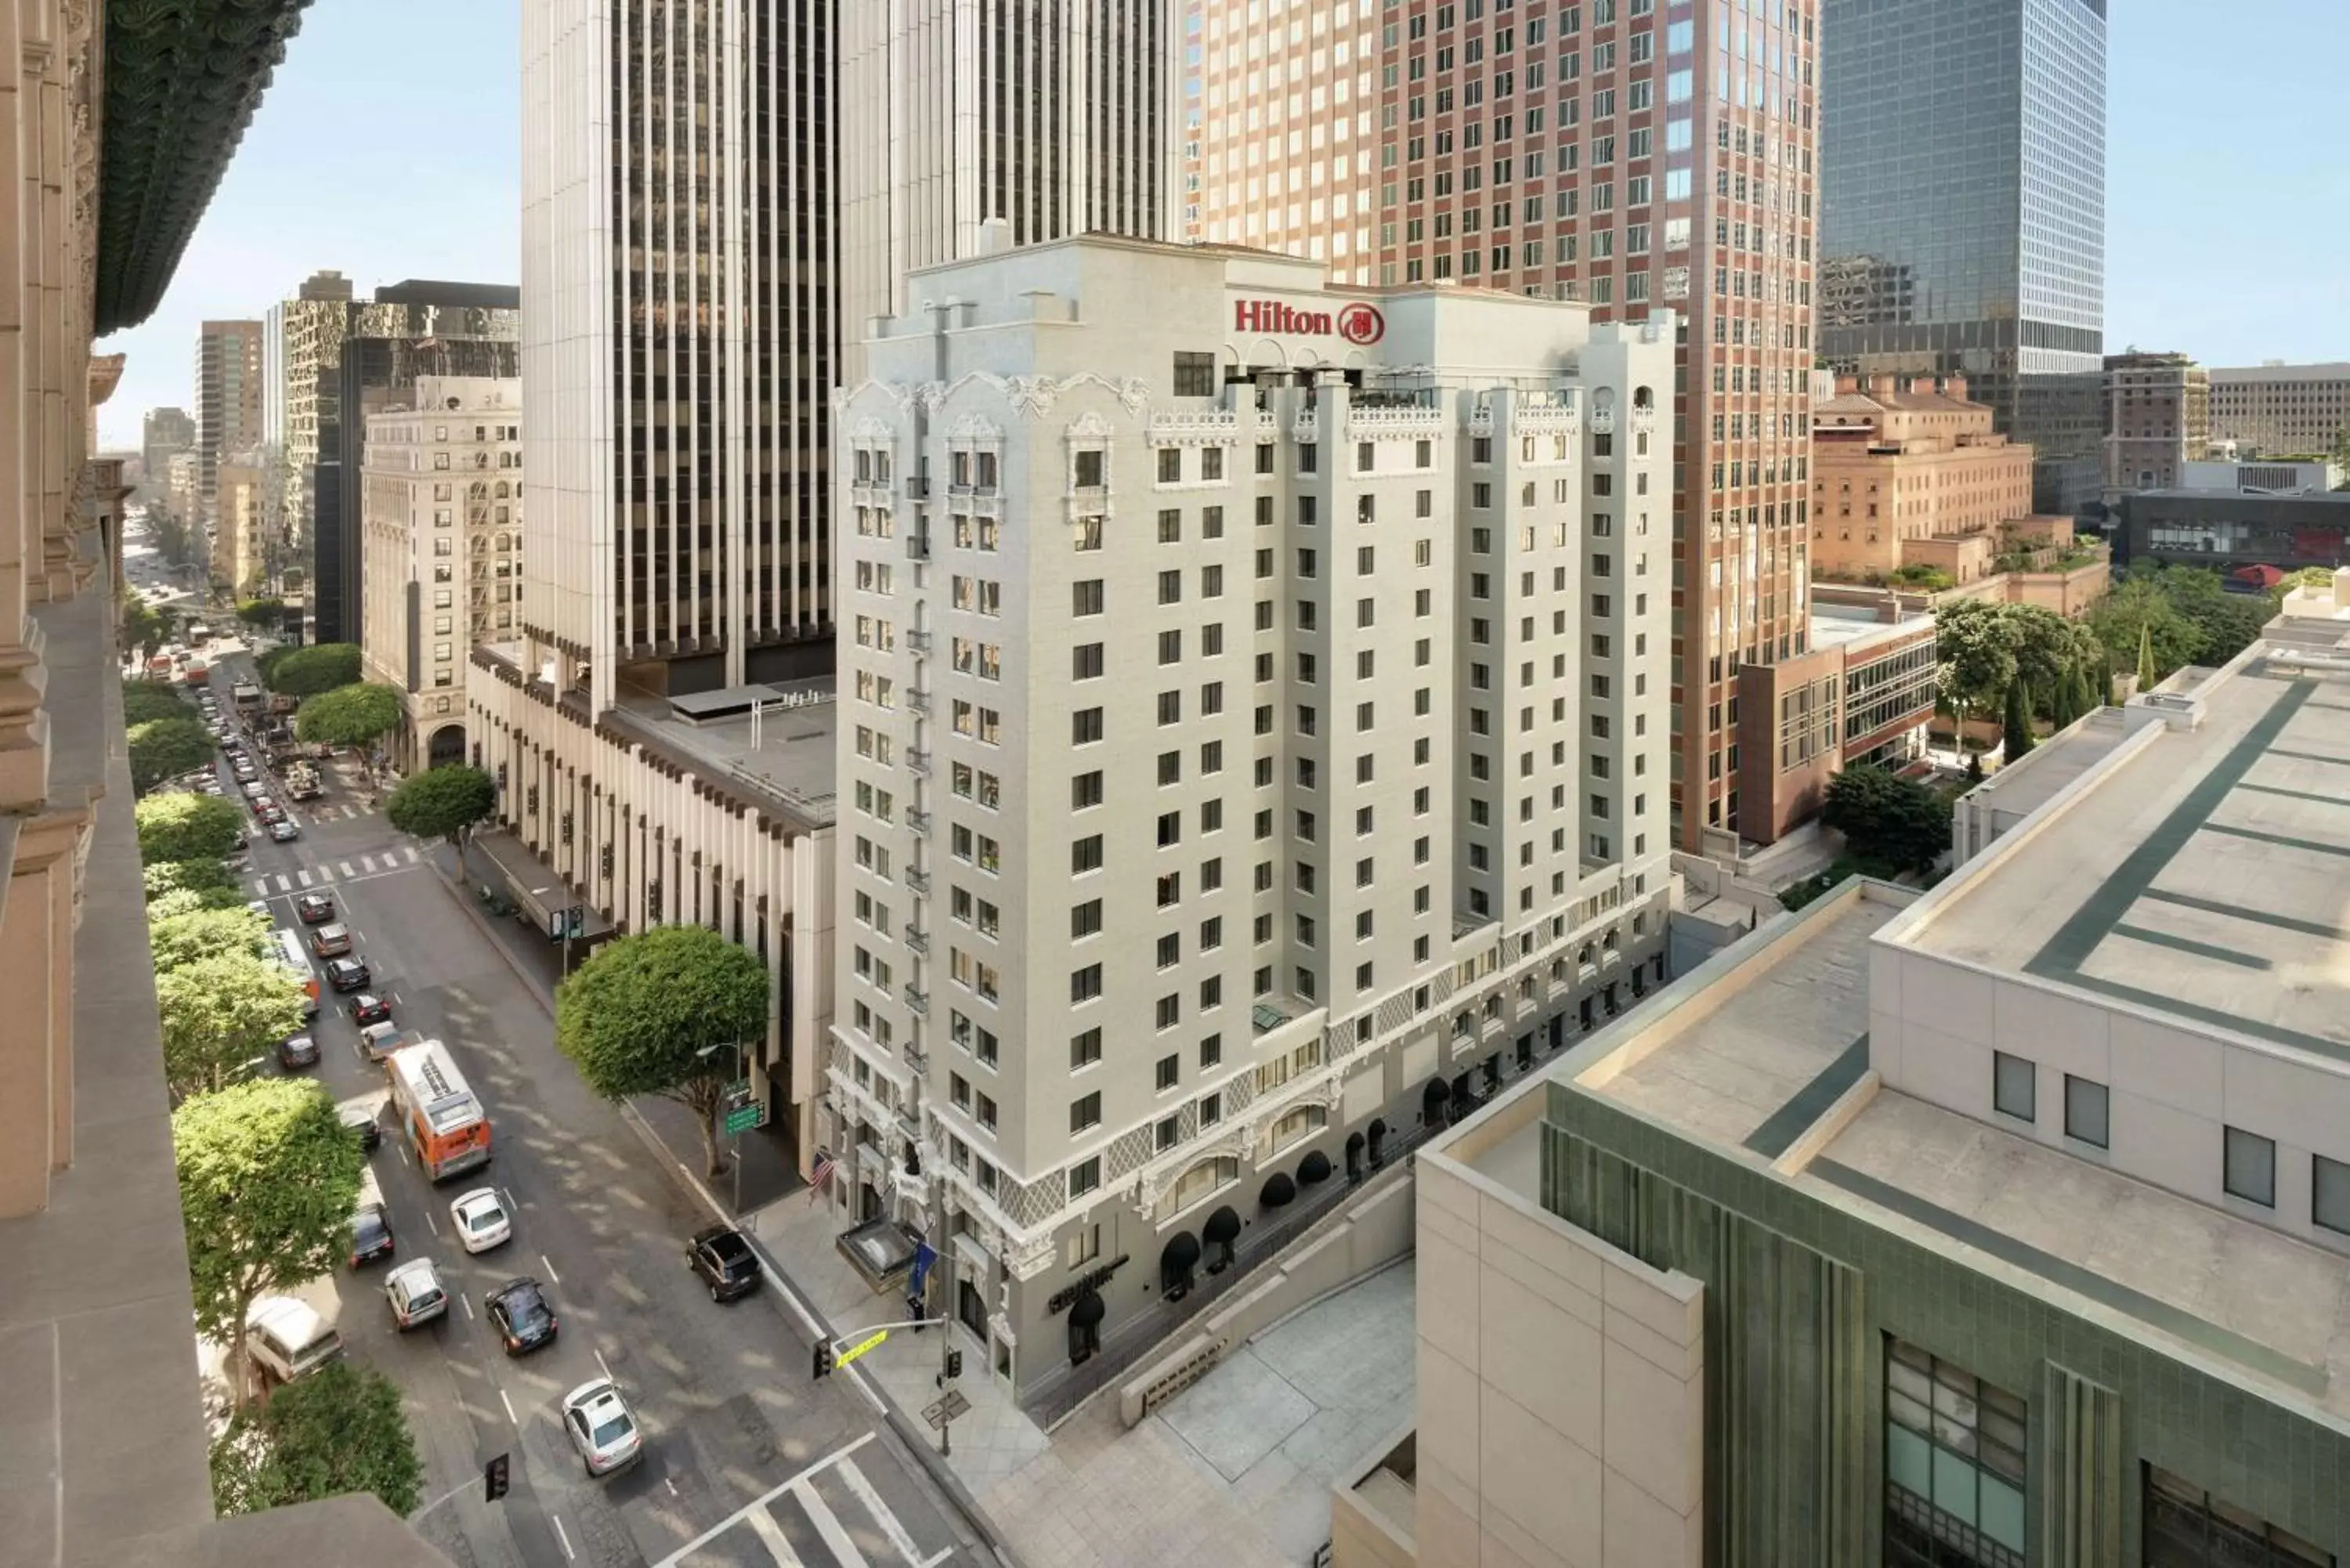 Property building in Hilton Checkers Los Angeles